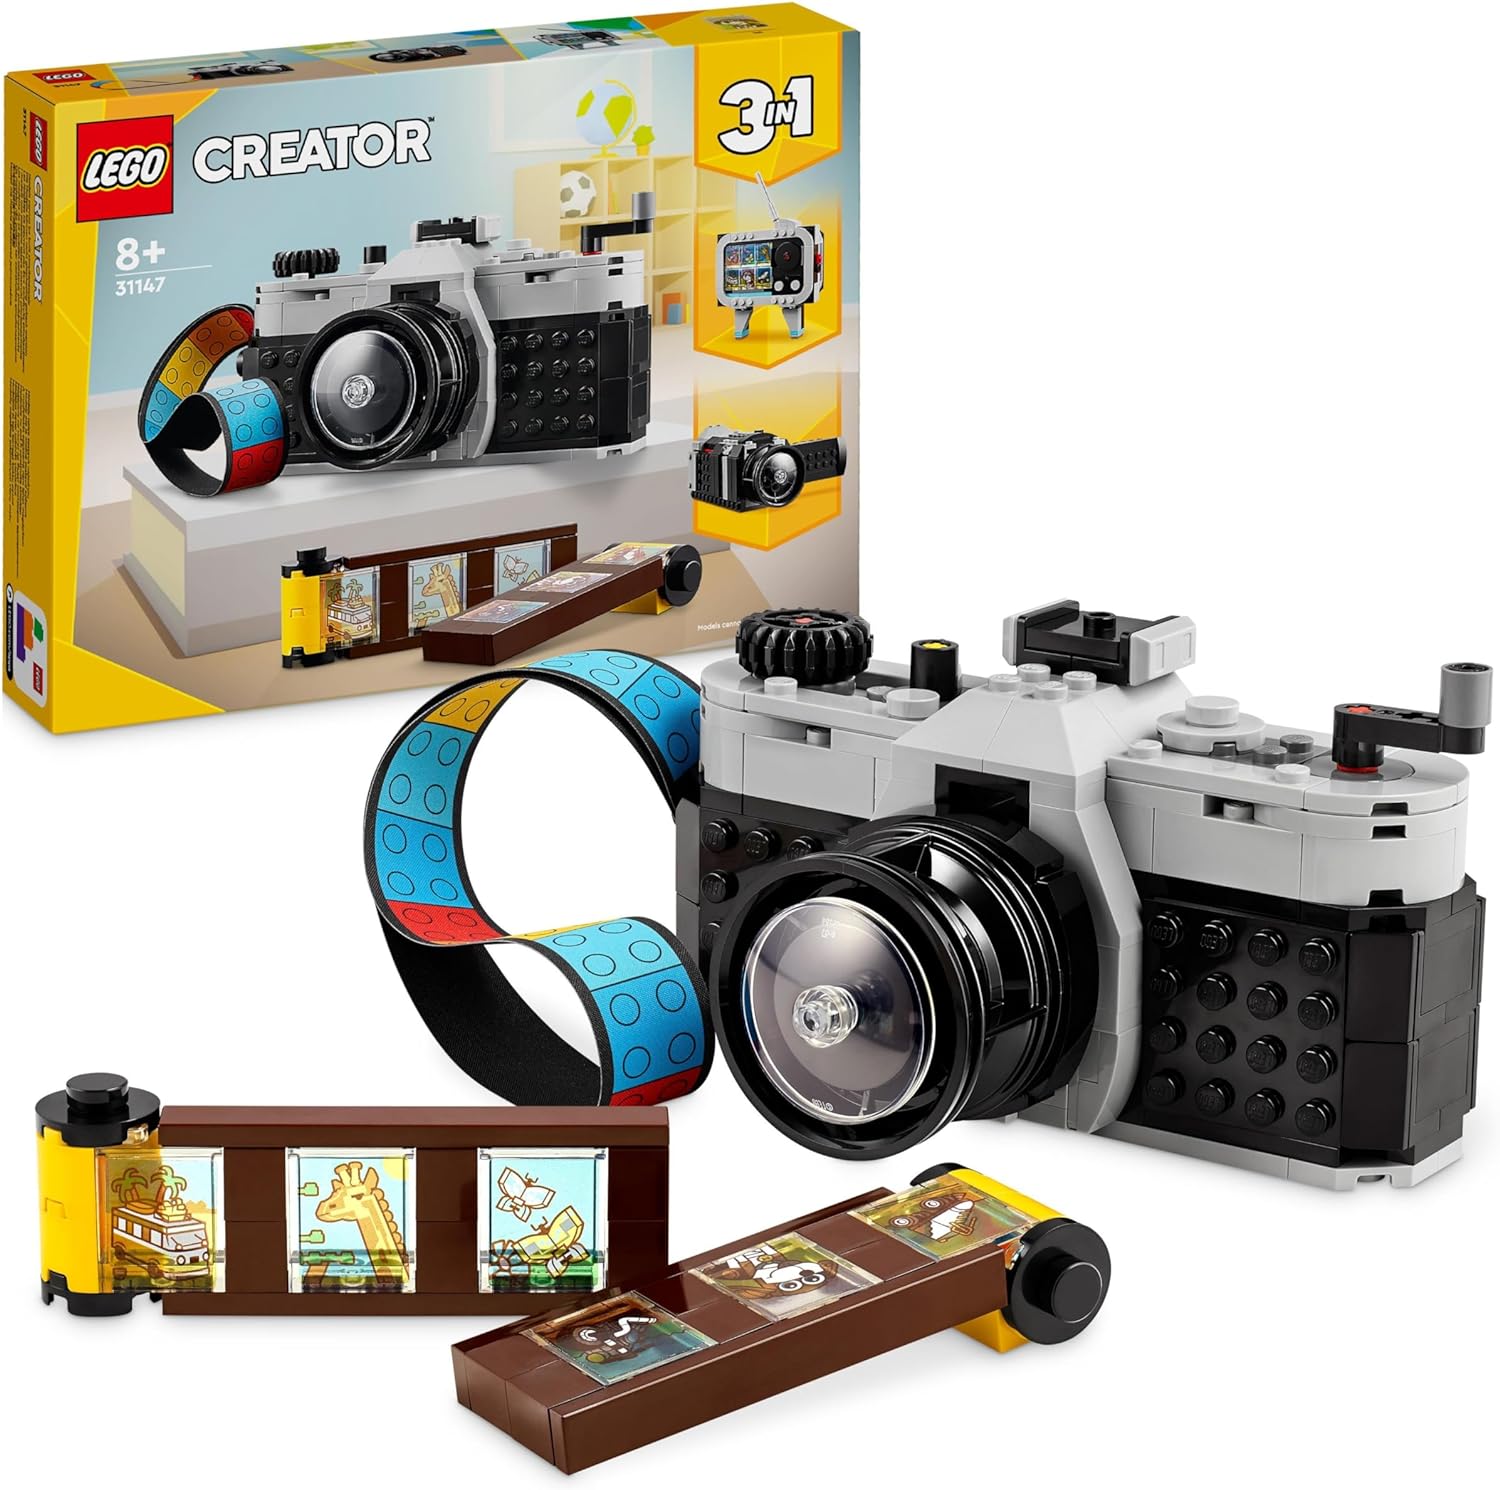 LEGO Creator 31147 3-in-1 Retro Camera Toy with 3 Models for Girls and Boys, Office and Room Decoration, Build in TV or Video Camera, Gift for Small Photographers from 8 Years